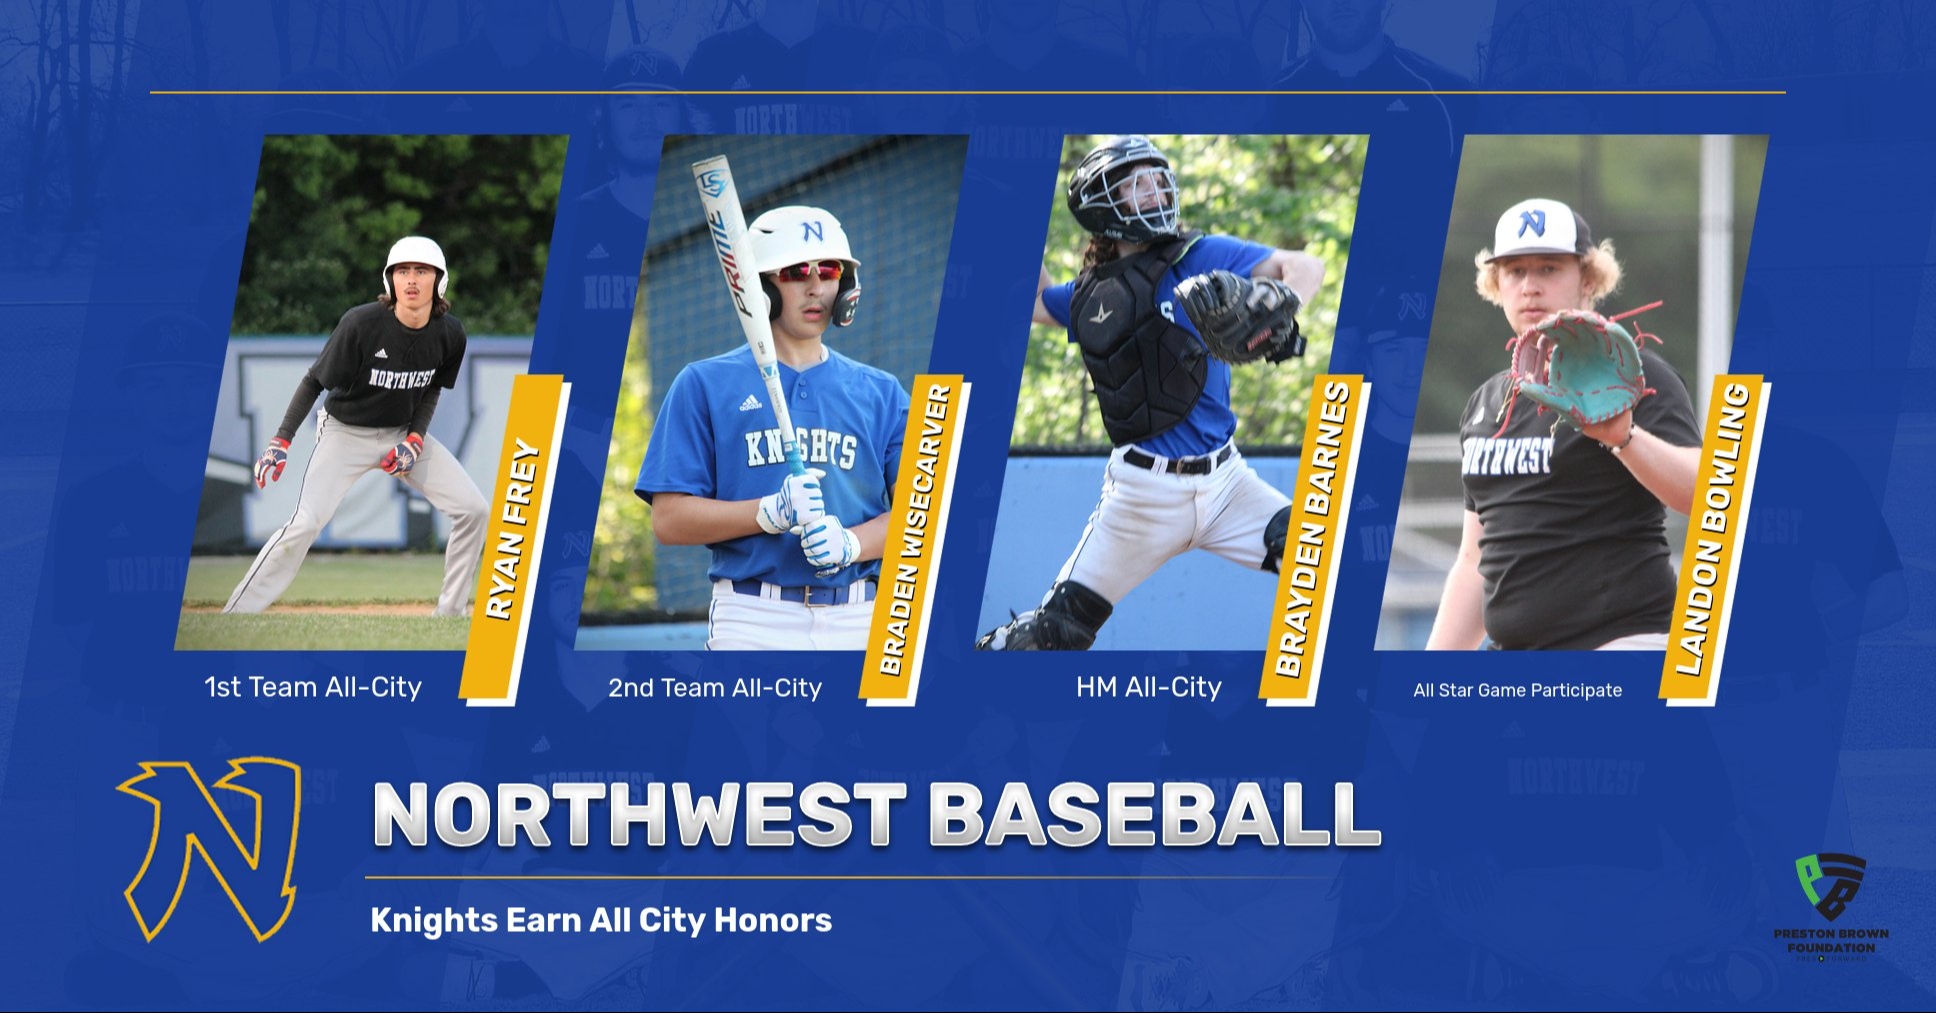 Knights Earn All City Honors - Content Image for demo7363_bigteams_2474